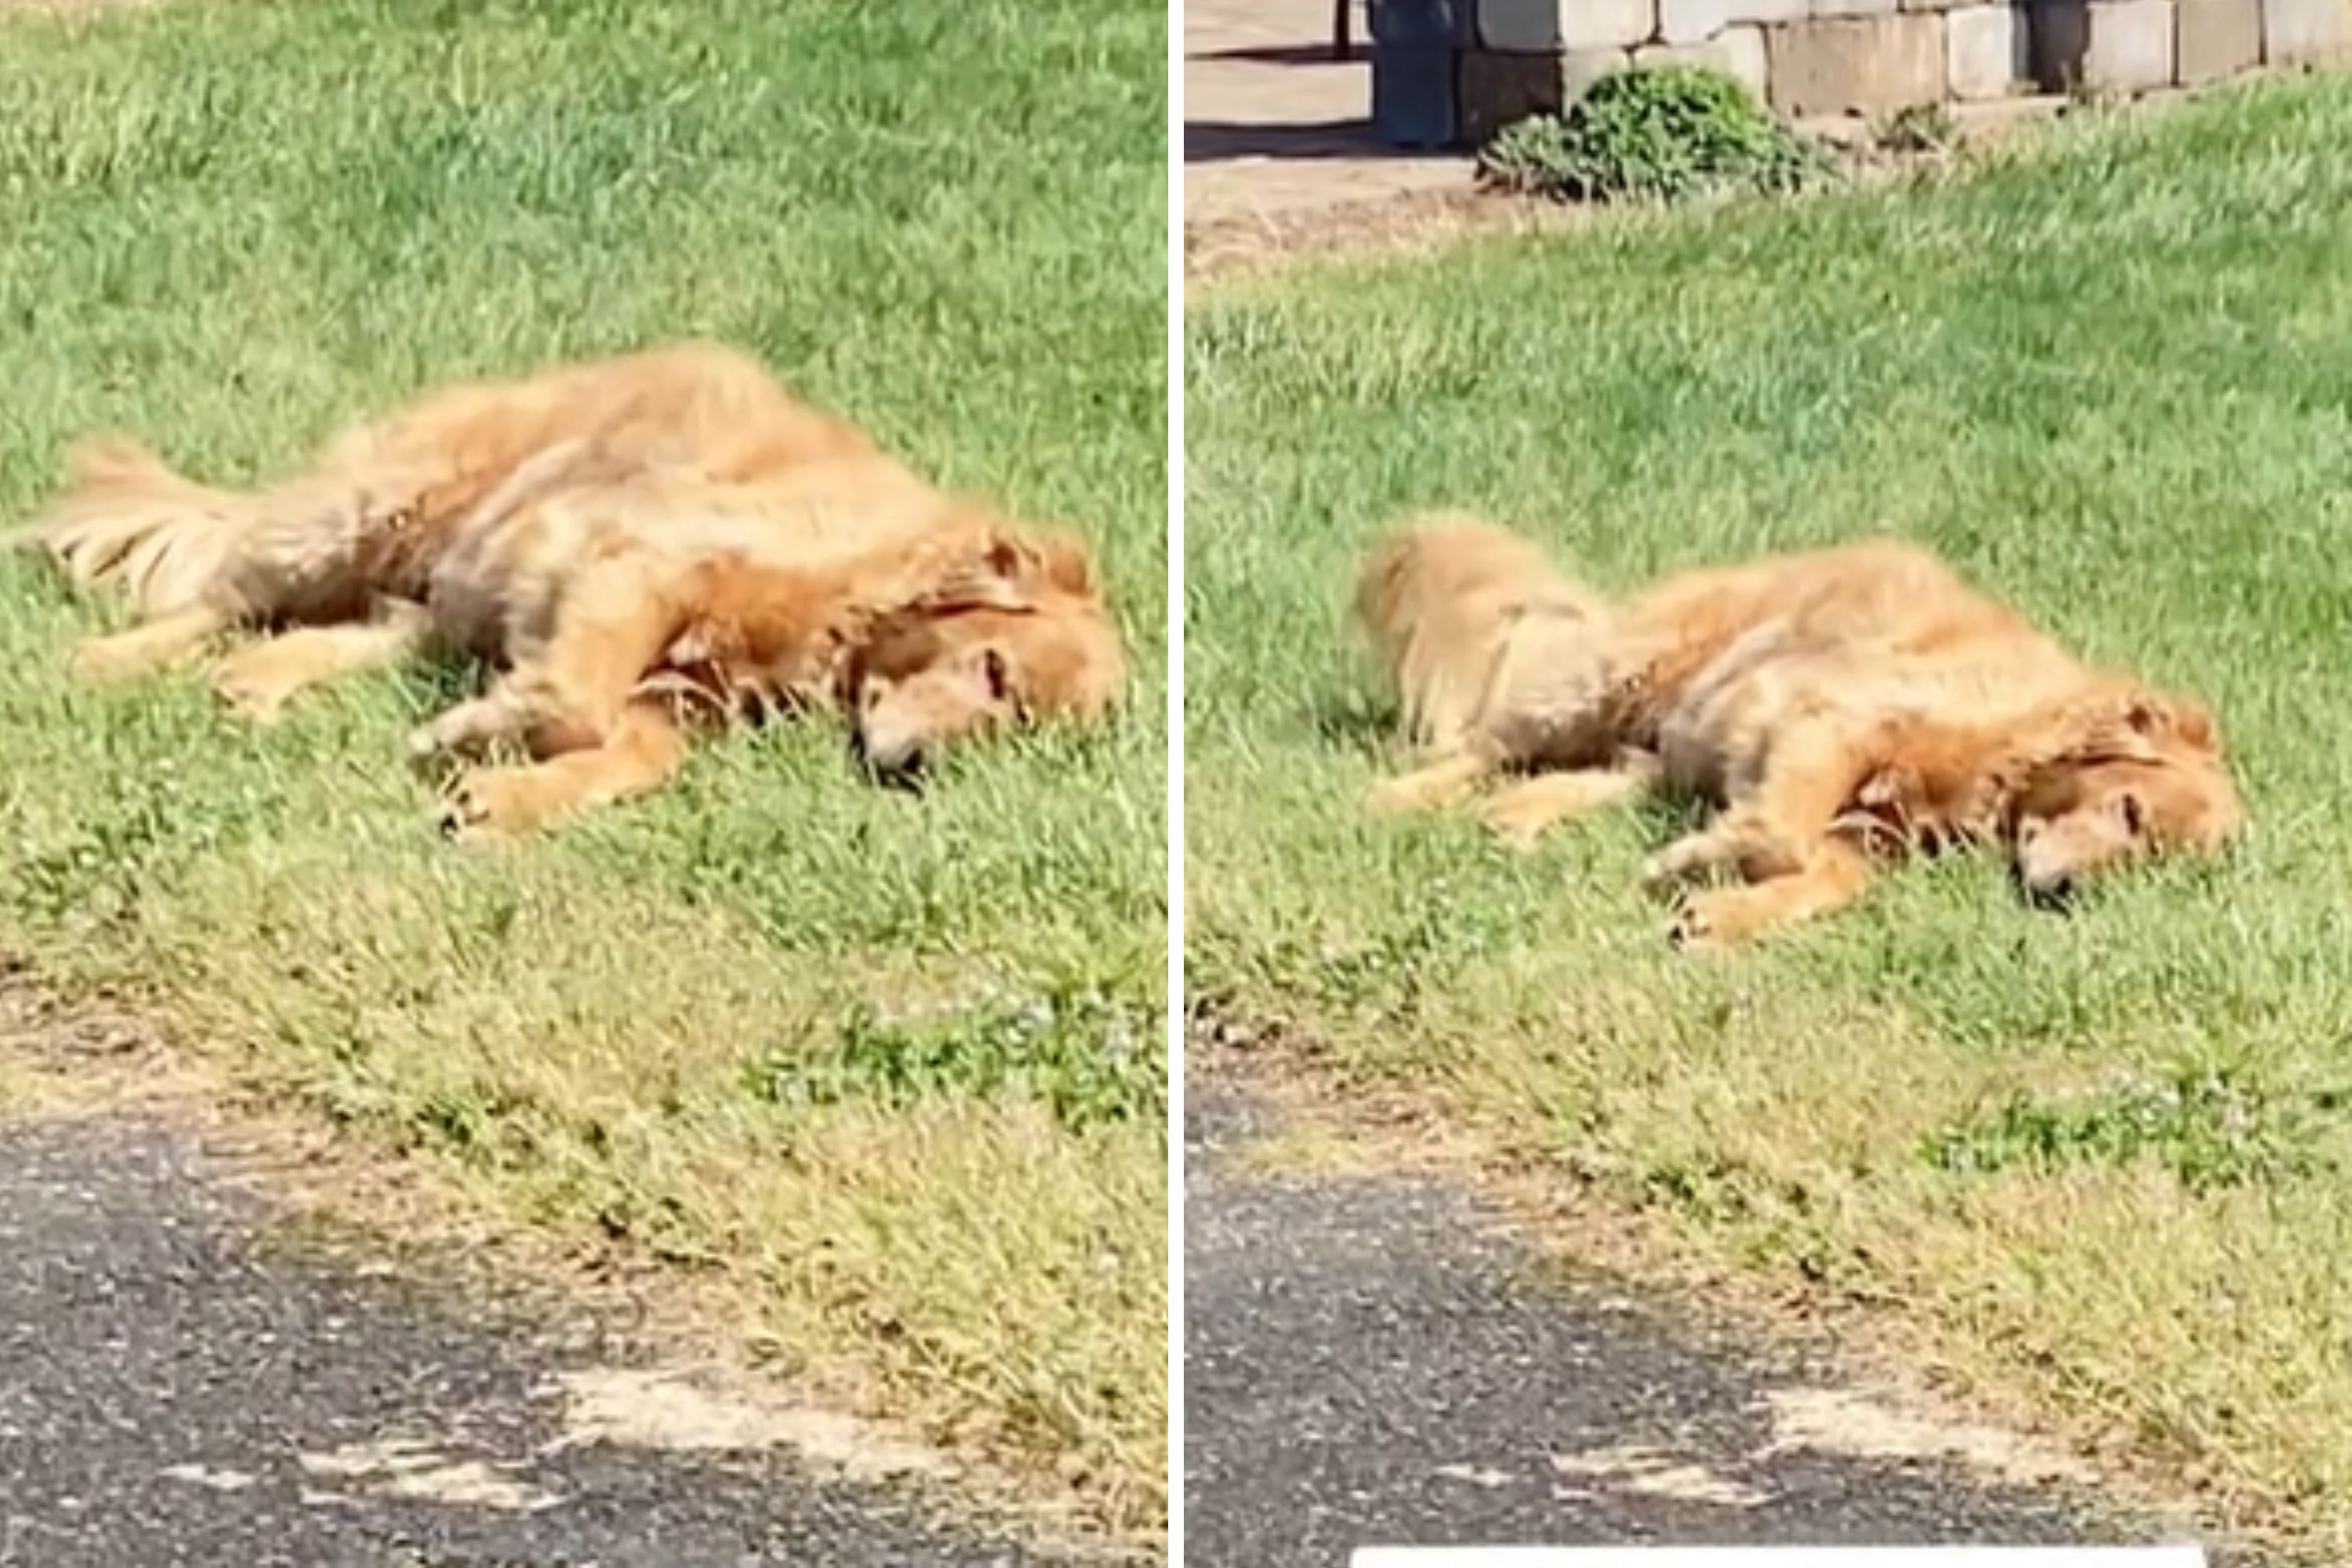 Watch as golden retriever refuses to leave grandma’s house “every time”